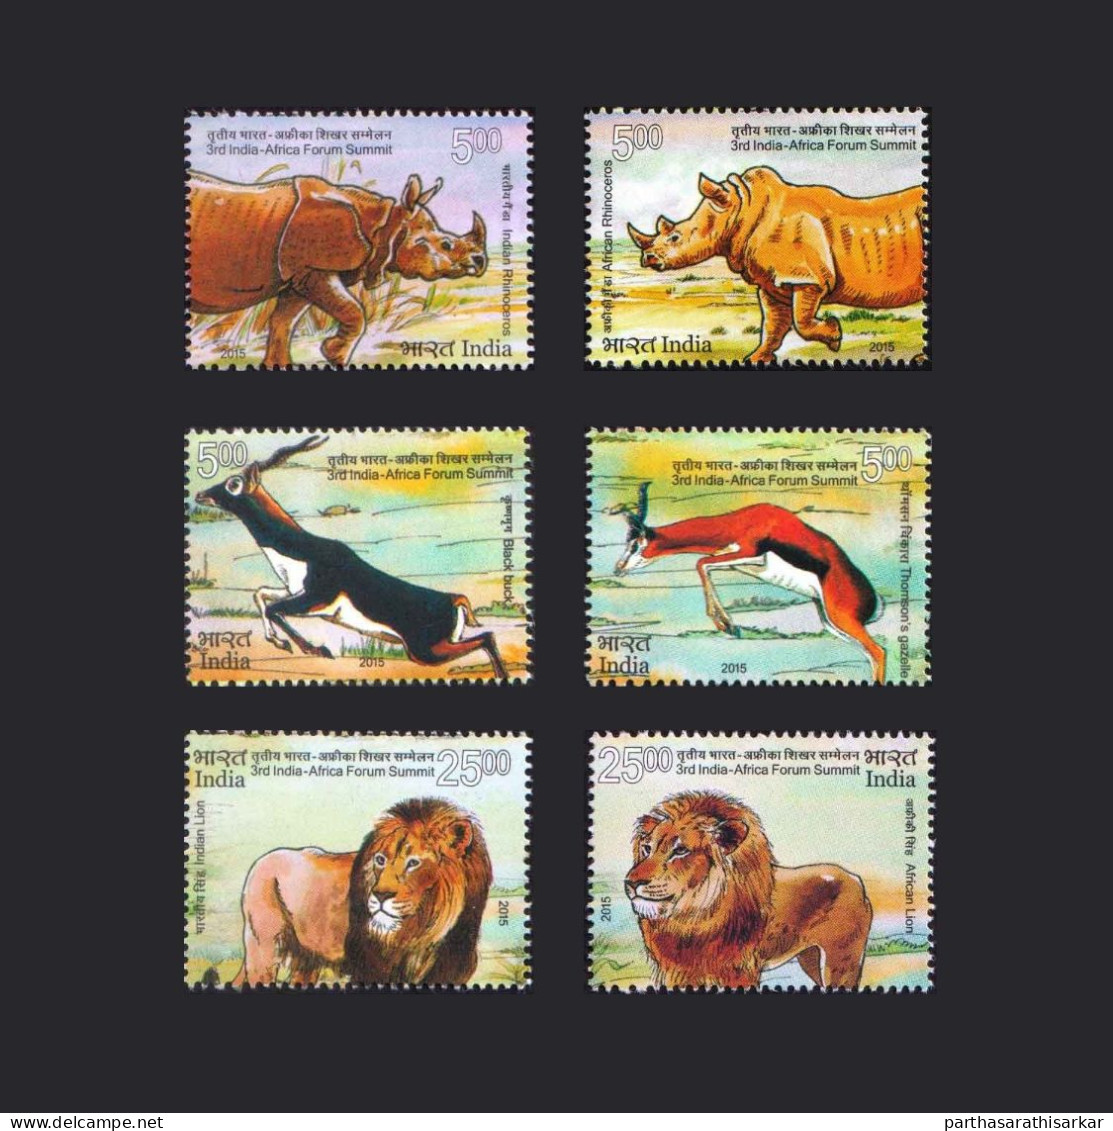 INDIA 2015 3RD INDIA-AFRICA FORUM SUMMIT FAUNA ANIMALS COMPLETE SET OF 6V STAMPS MNH - Ungebraucht